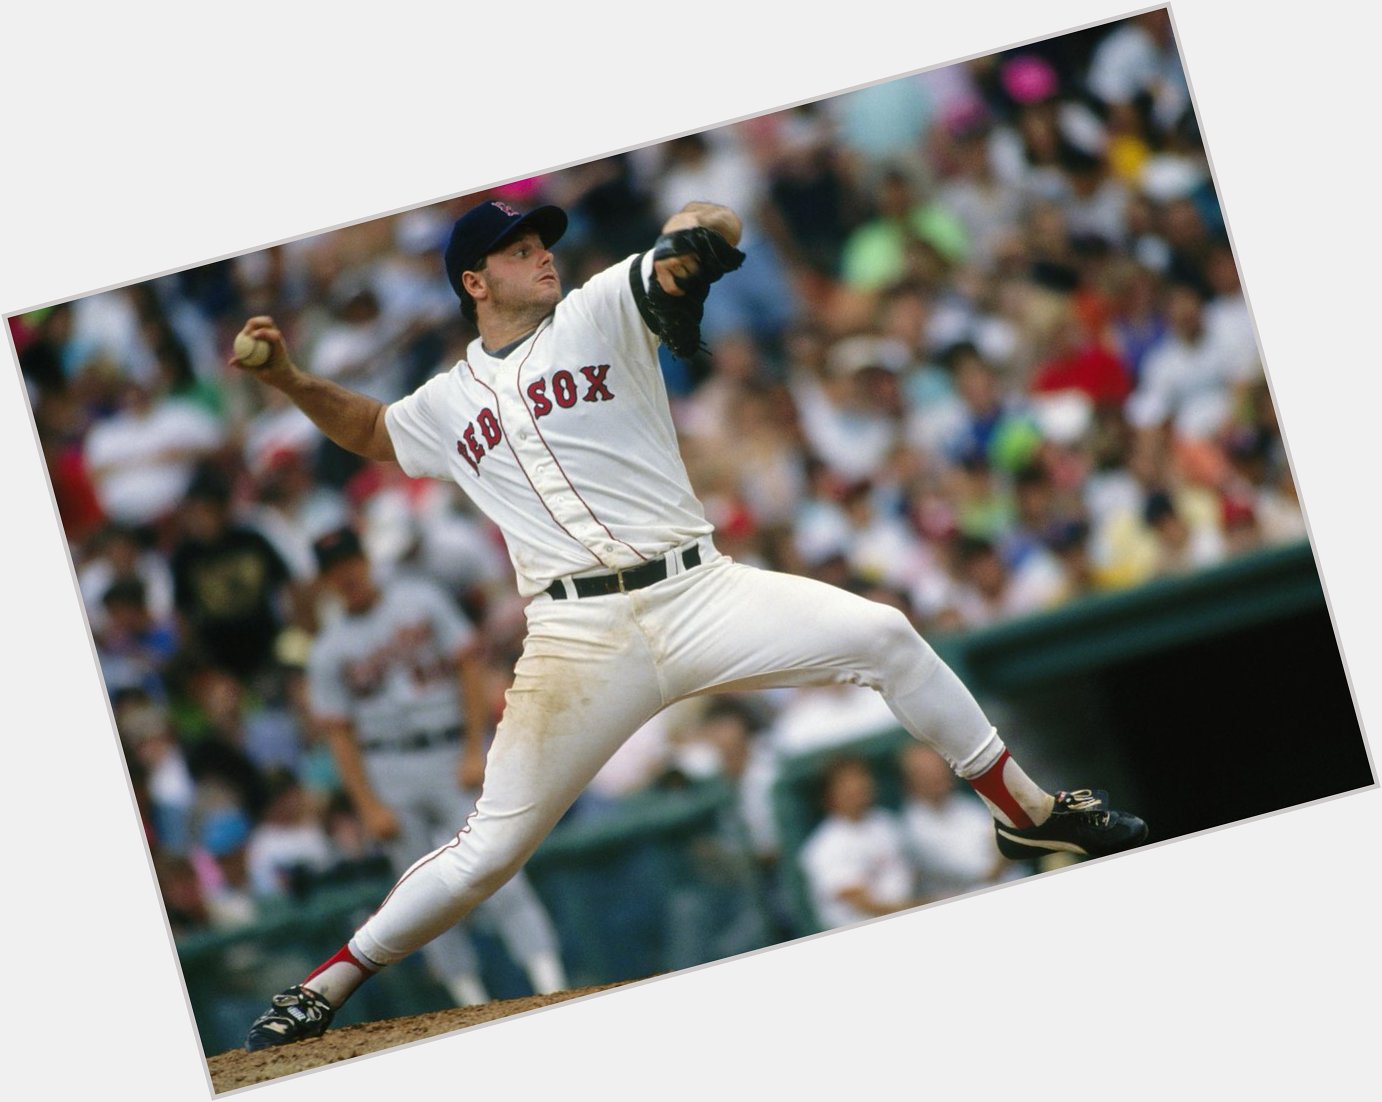 Happy Birthday to Roger Clemens, who turns 53 today! 